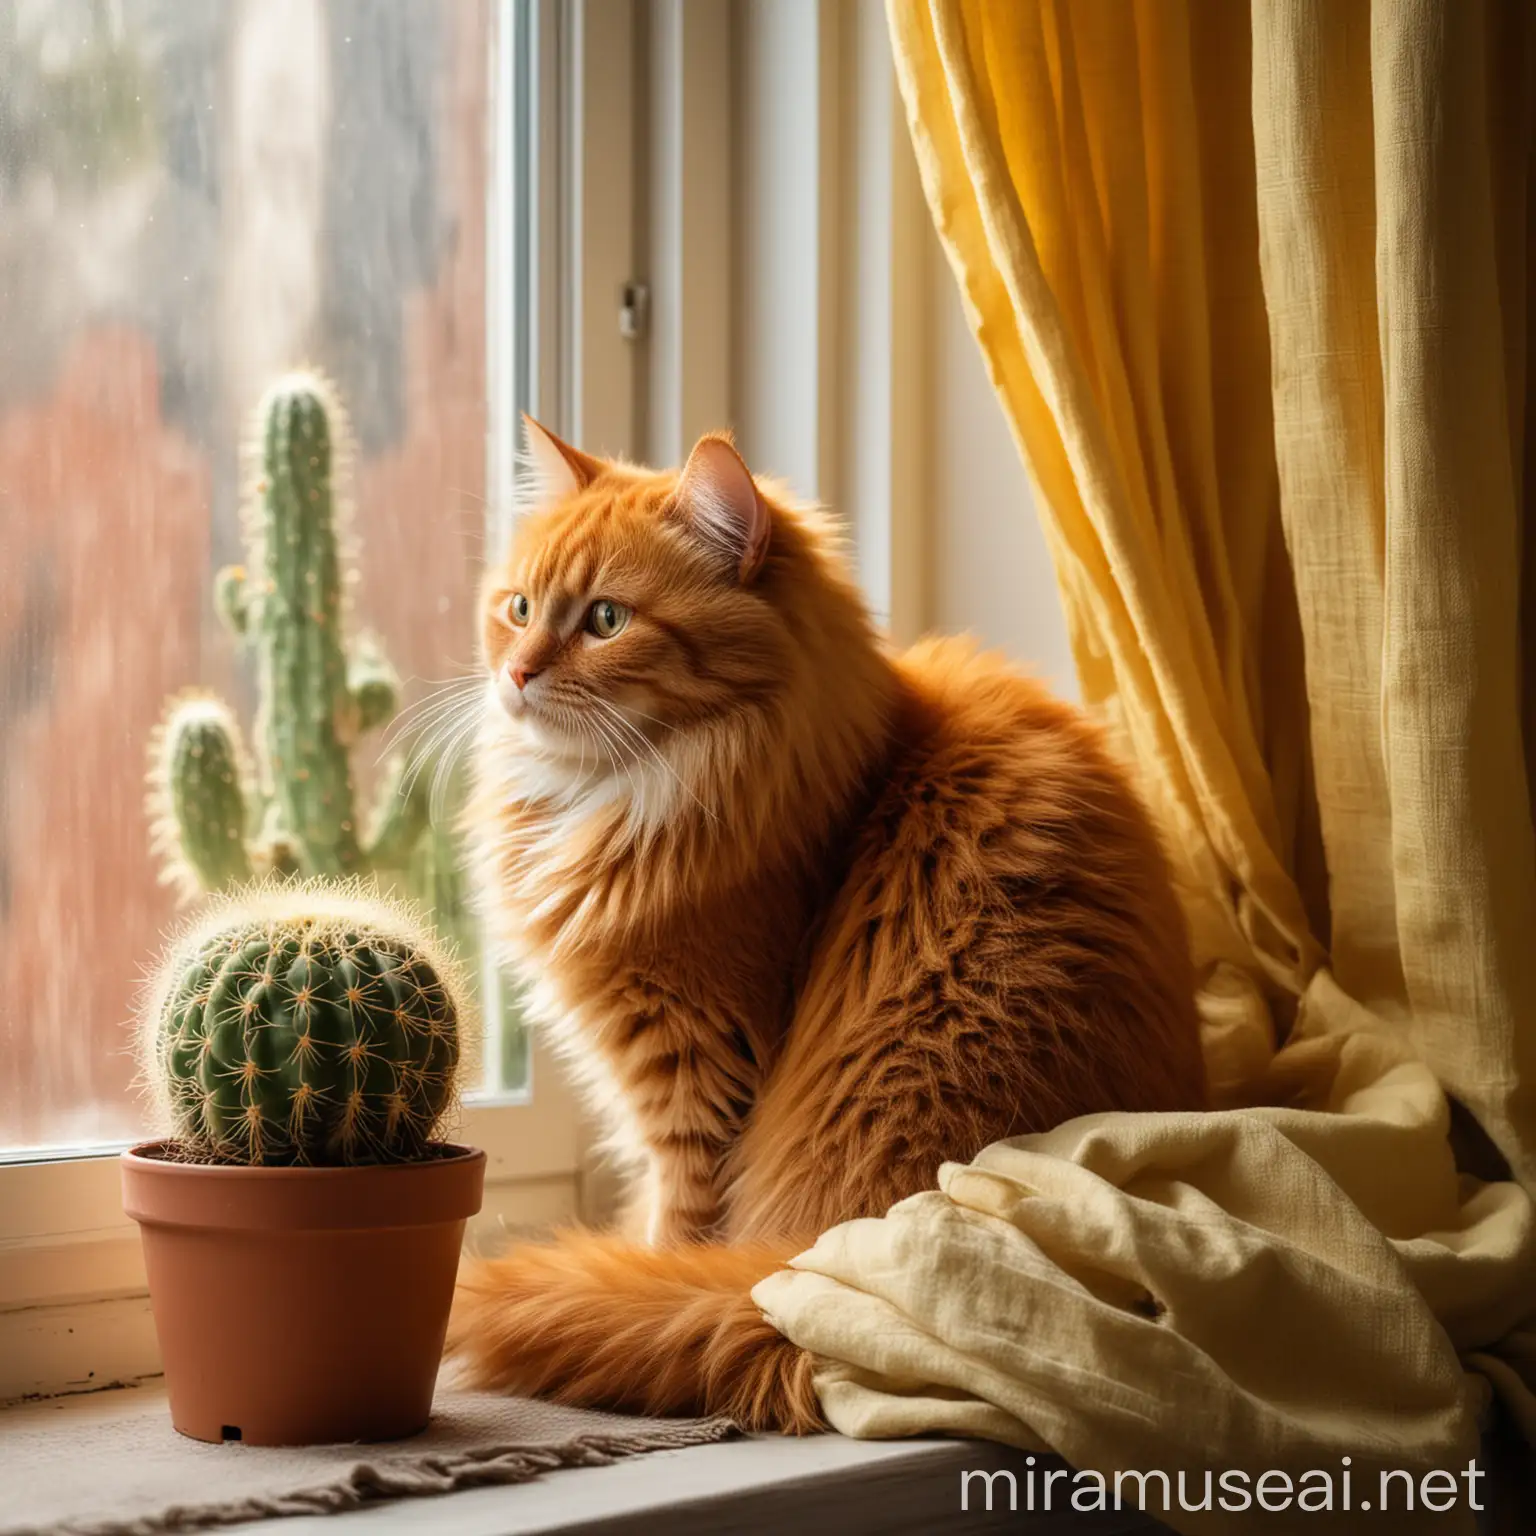 Adorable Red Cat Relaxing by Sunny Windowsill with Cactus